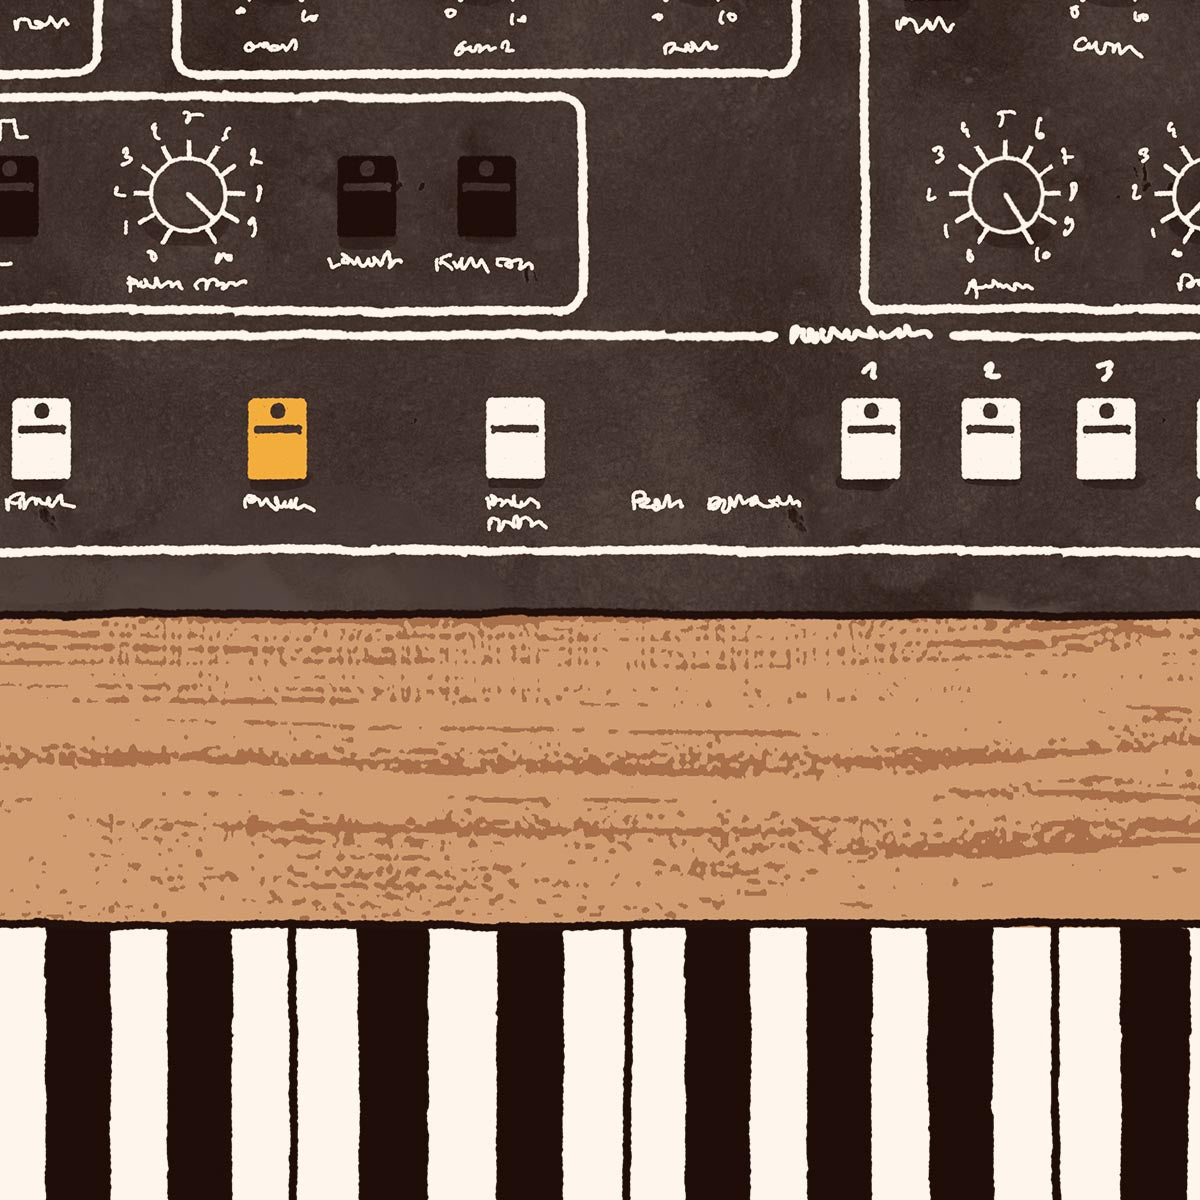  Synthesizers by Florent Bodart